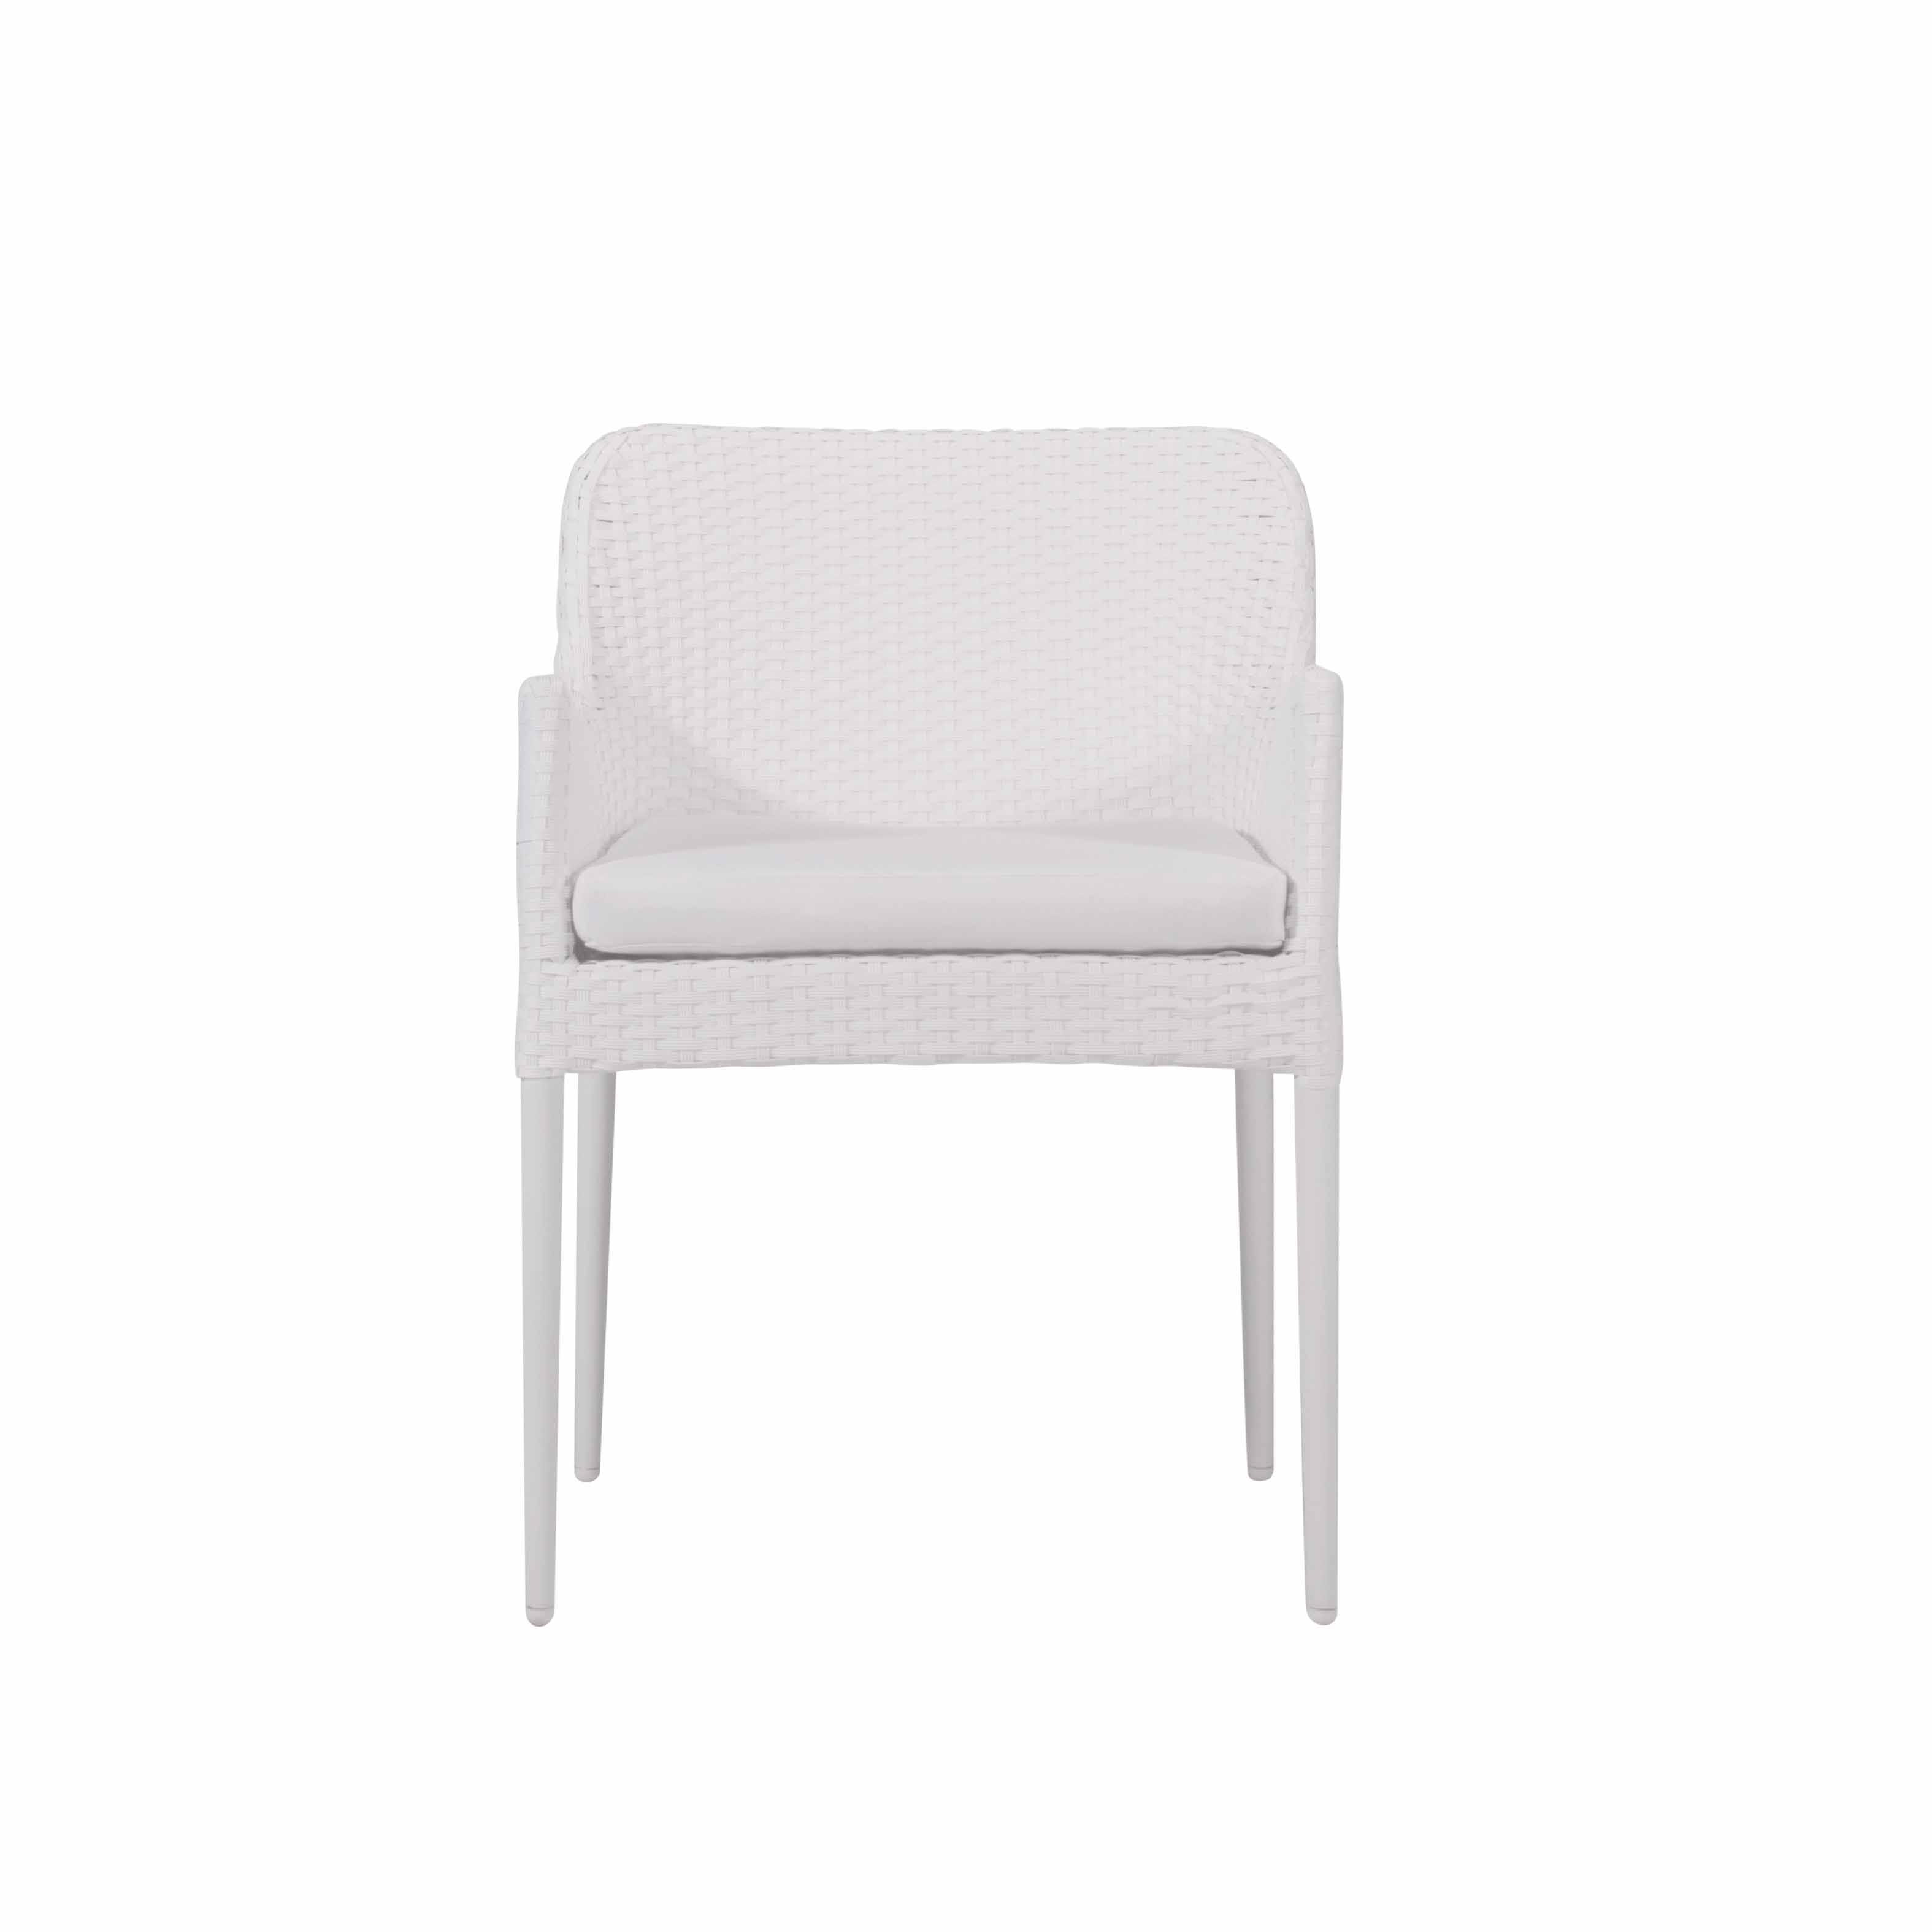 Molly rattan dining chair S2